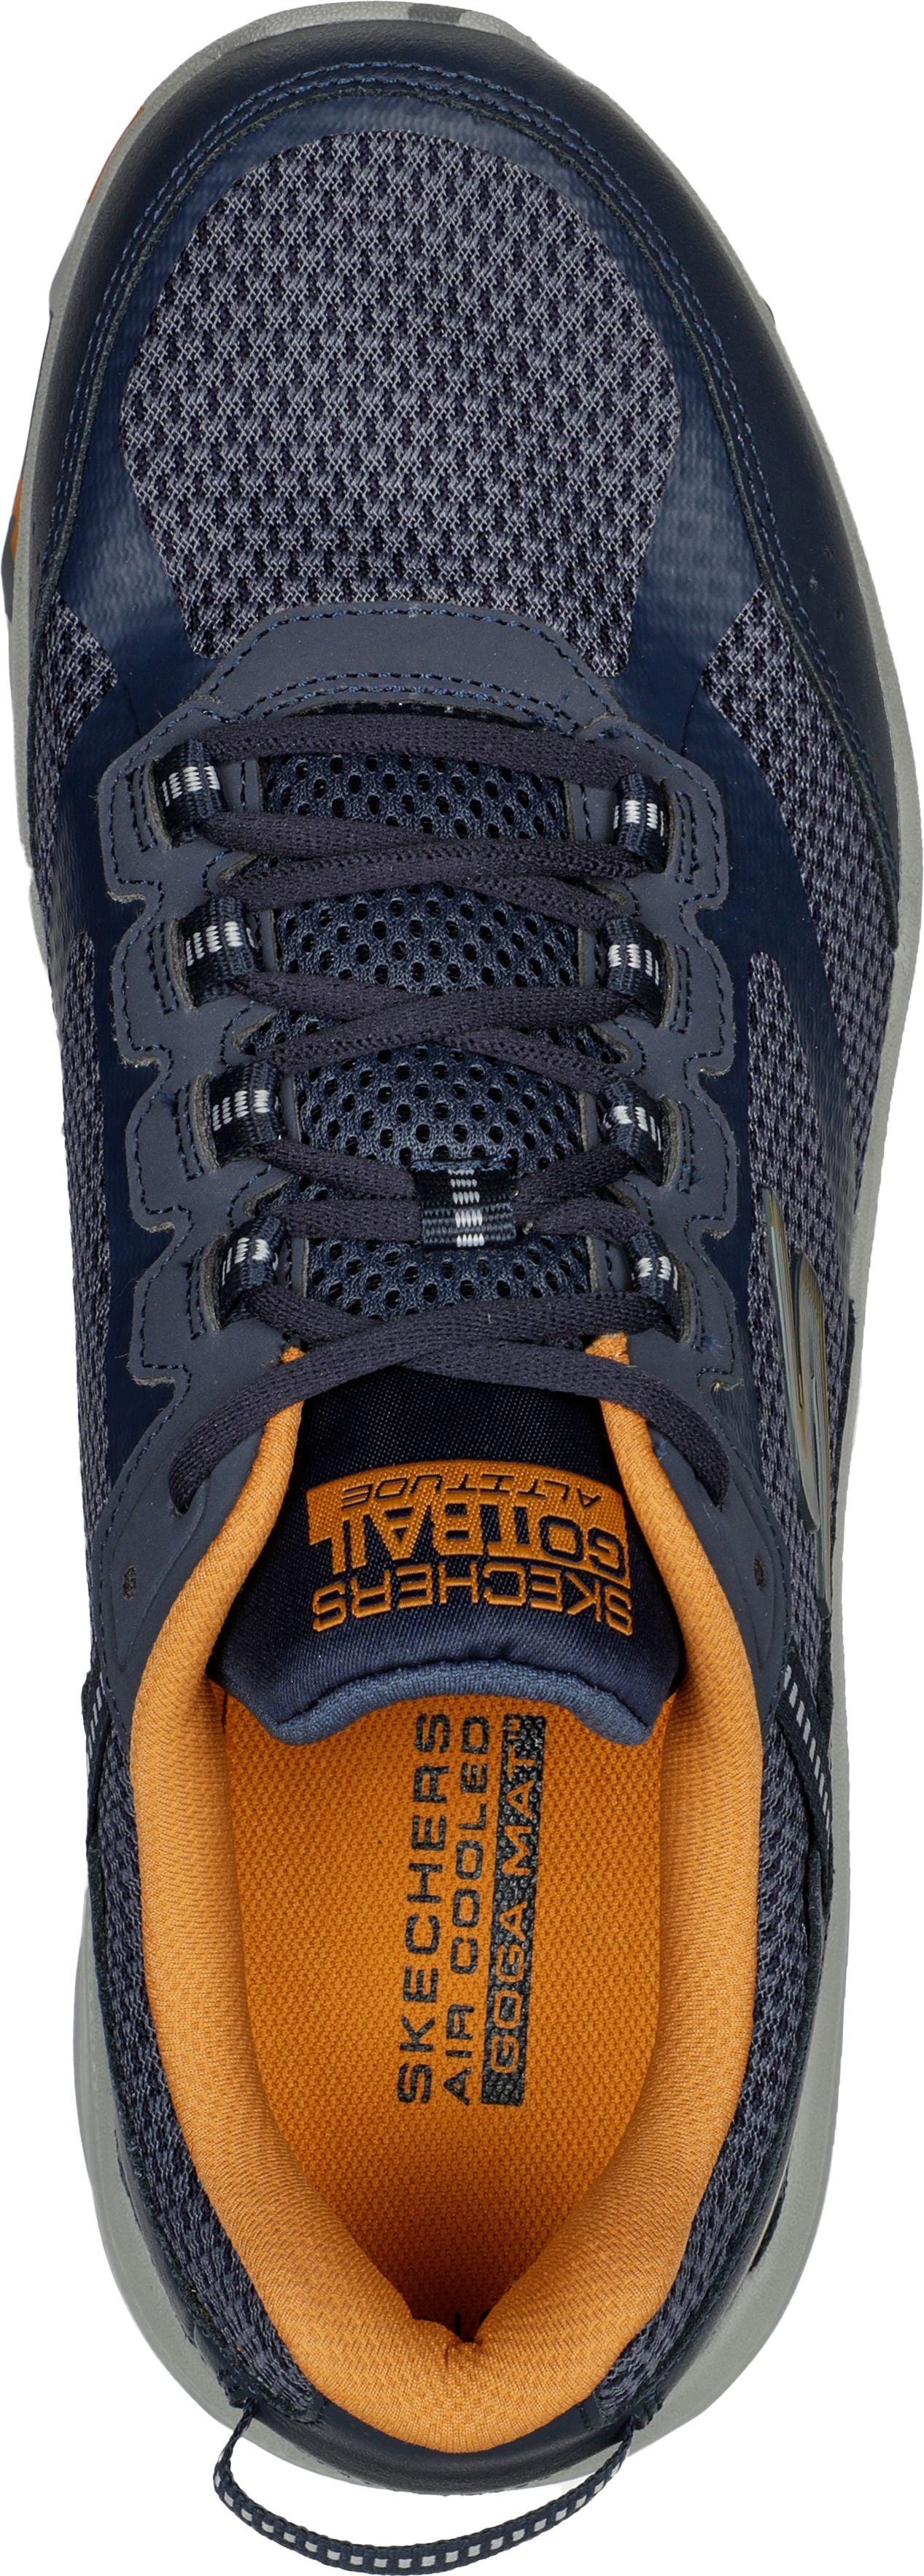 Skechers Shoes Gorun Trail Altitude Marble Navy